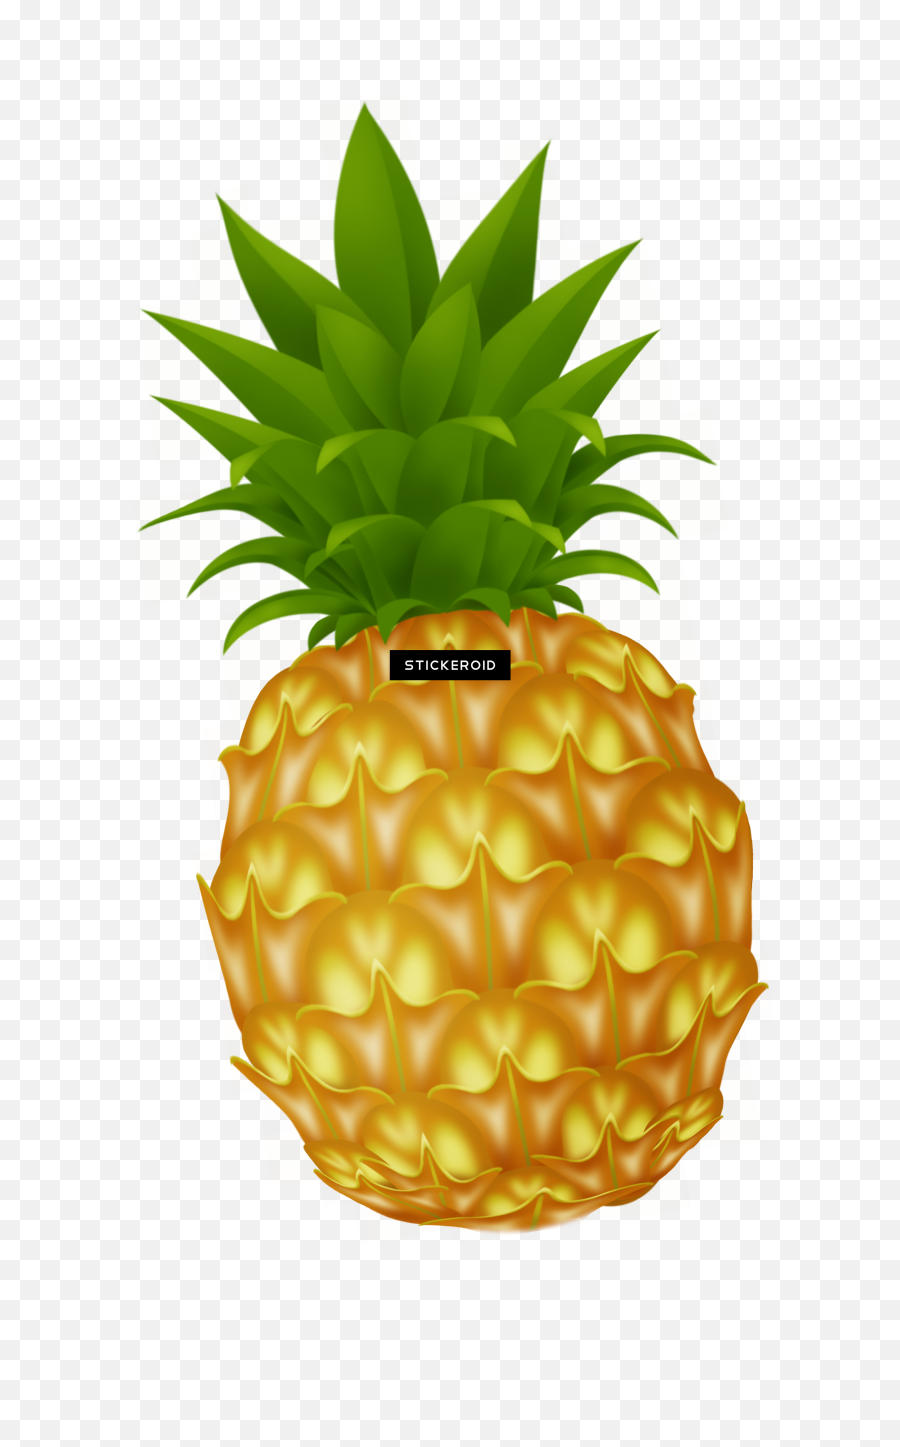 Download Pineapple Png Transparent Background